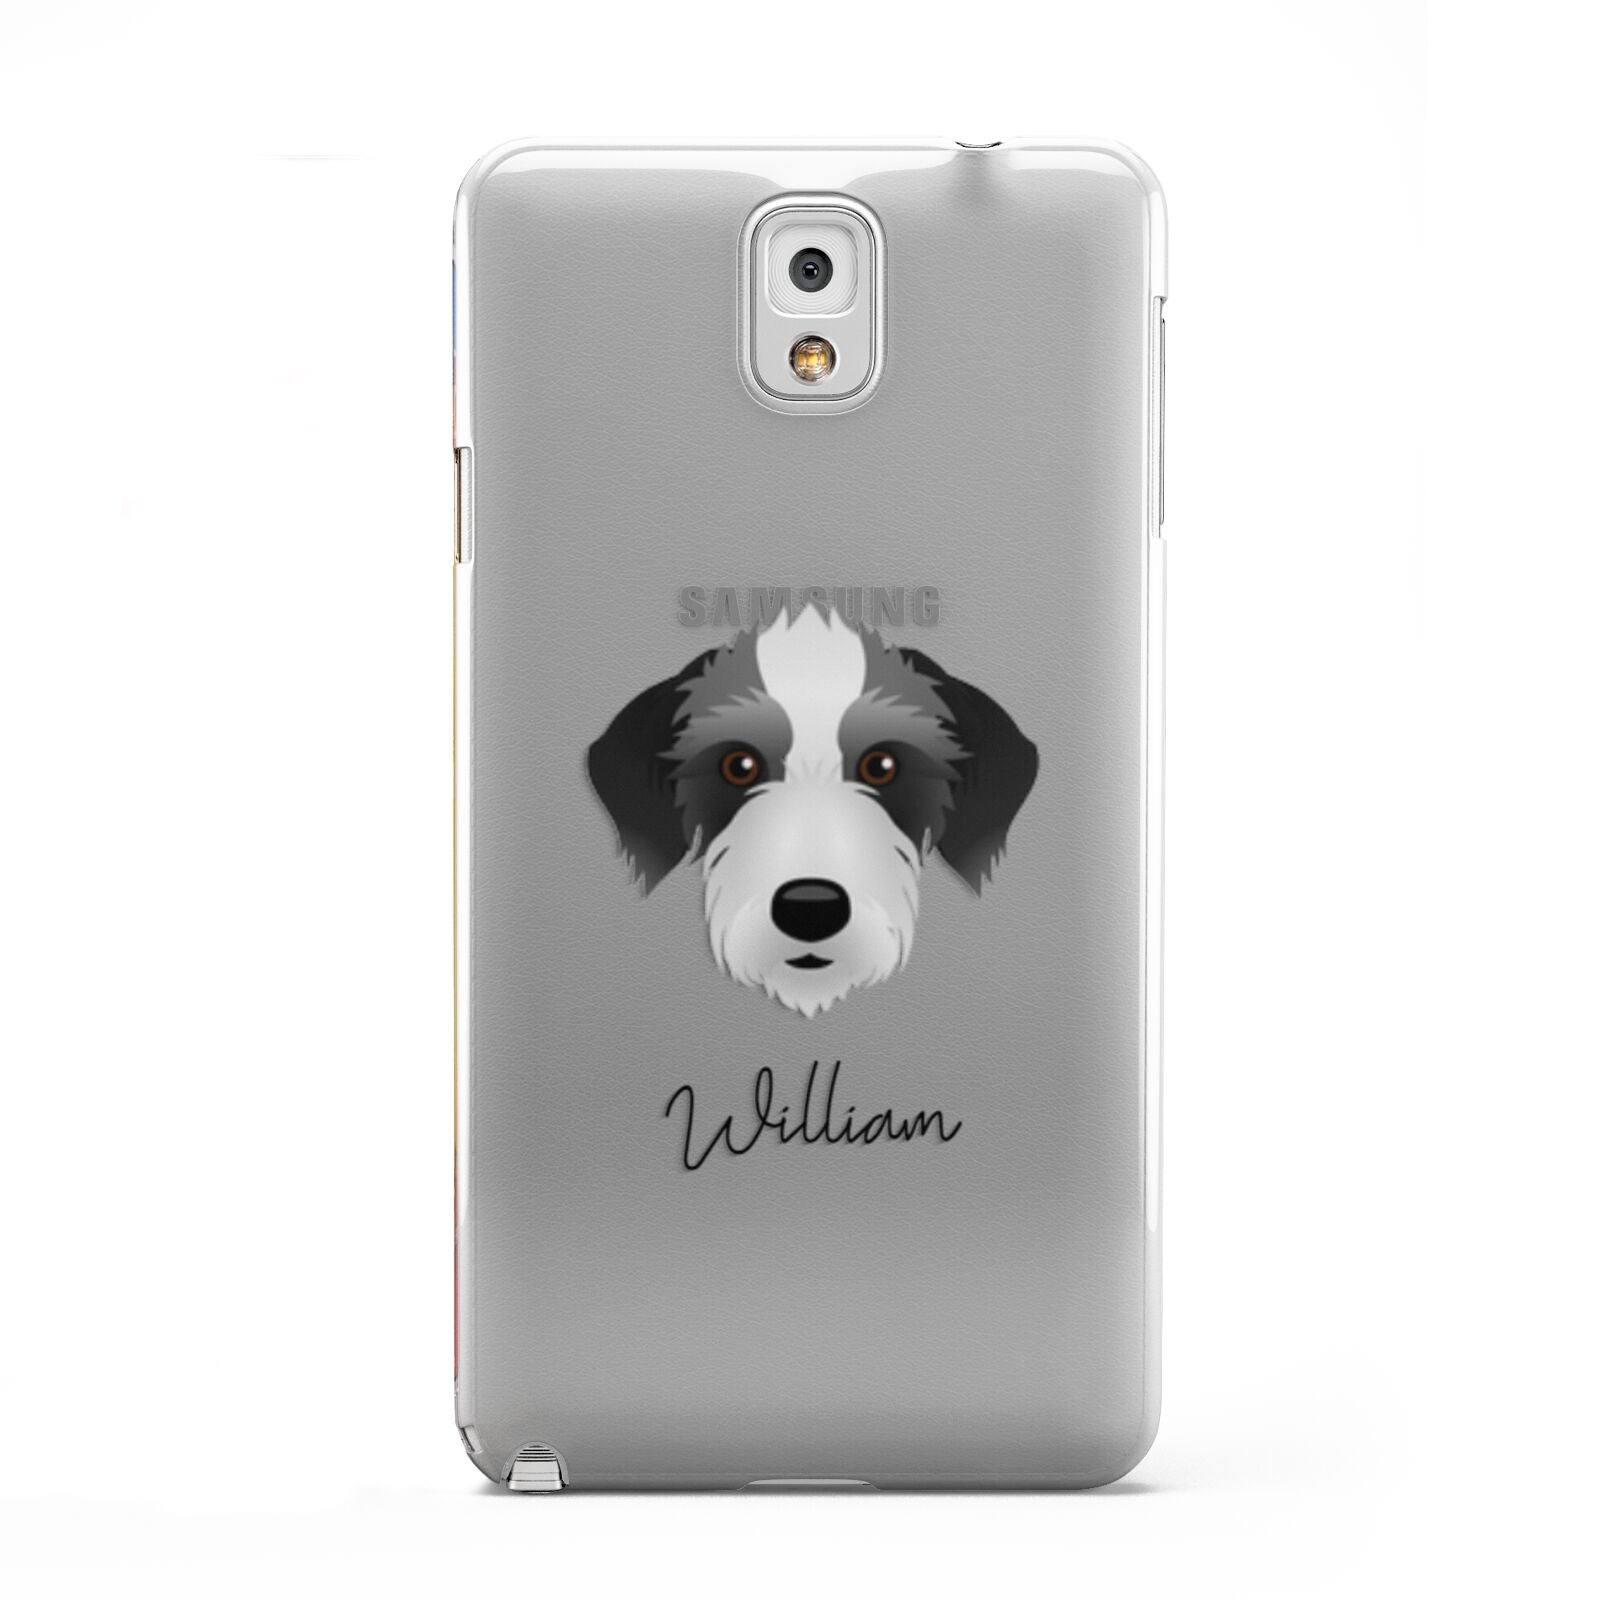 Bedlington Whippet Personalised Samsung Galaxy Note 3 Case